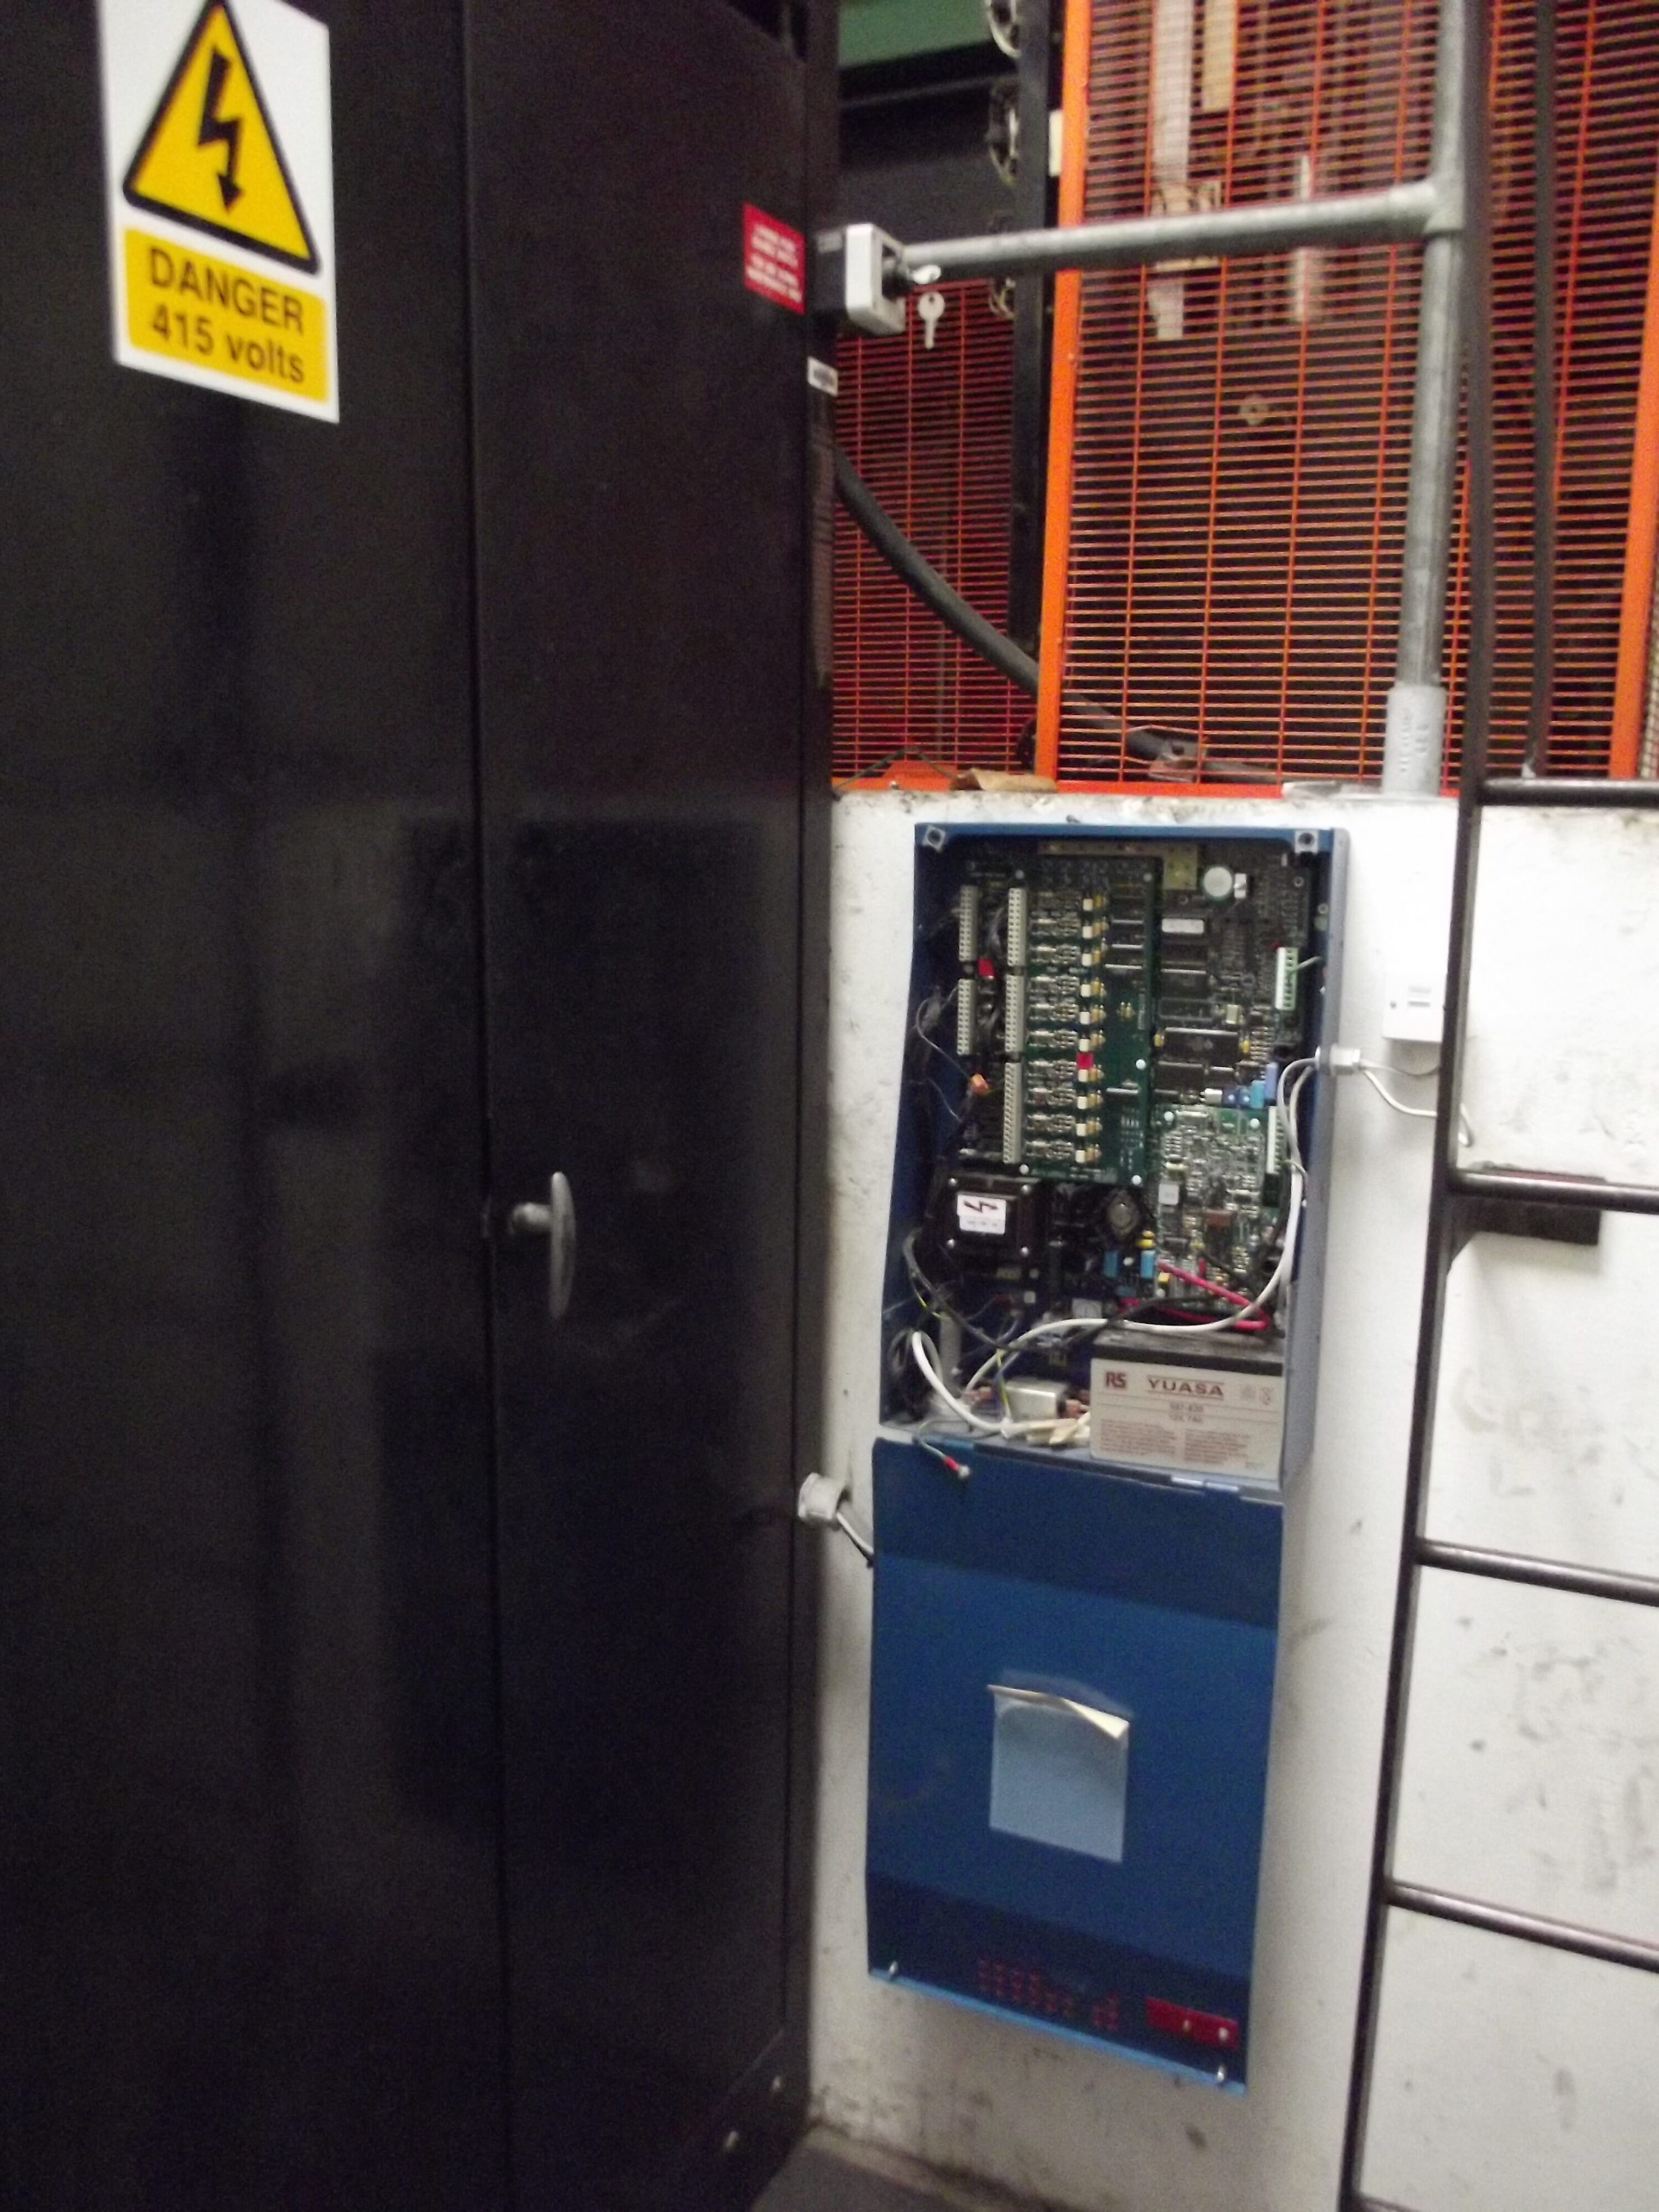 A lift control cabinet and REMS unit, 24 Sep 2011